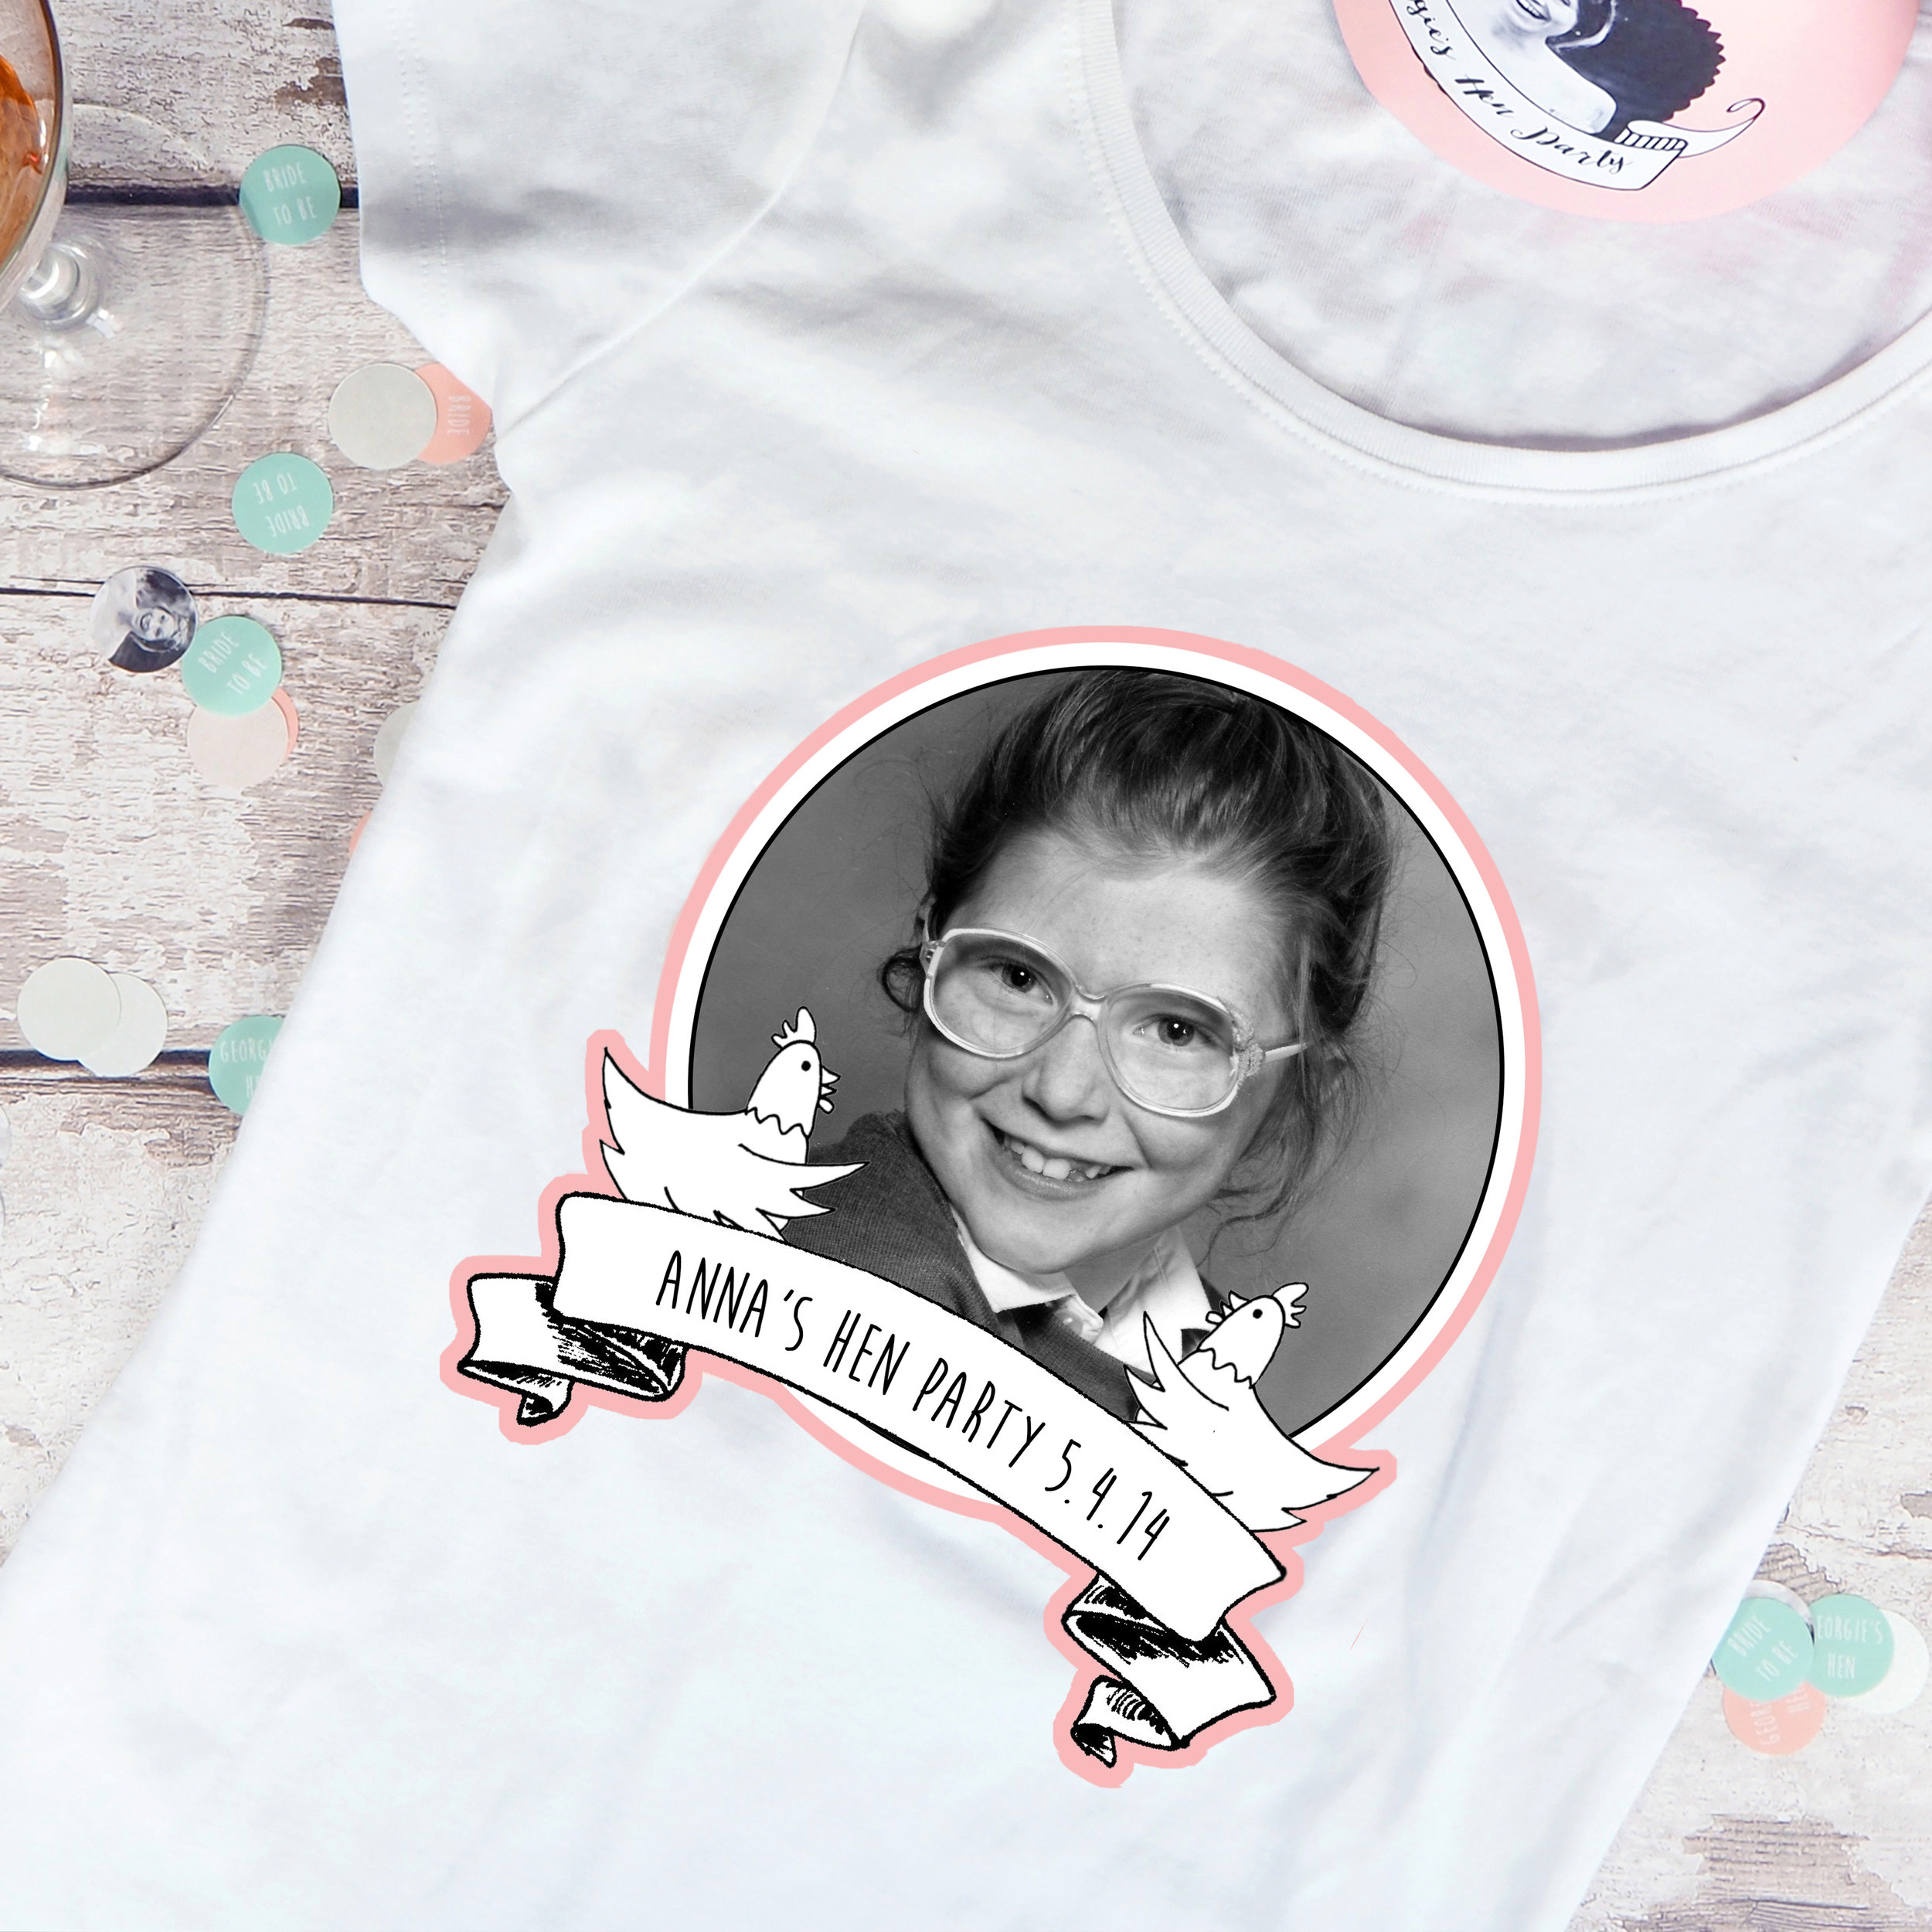 Details about   Personalised Design I Do Crew Hen Party Iron On T Shirt Heat Transfer Hen Party 